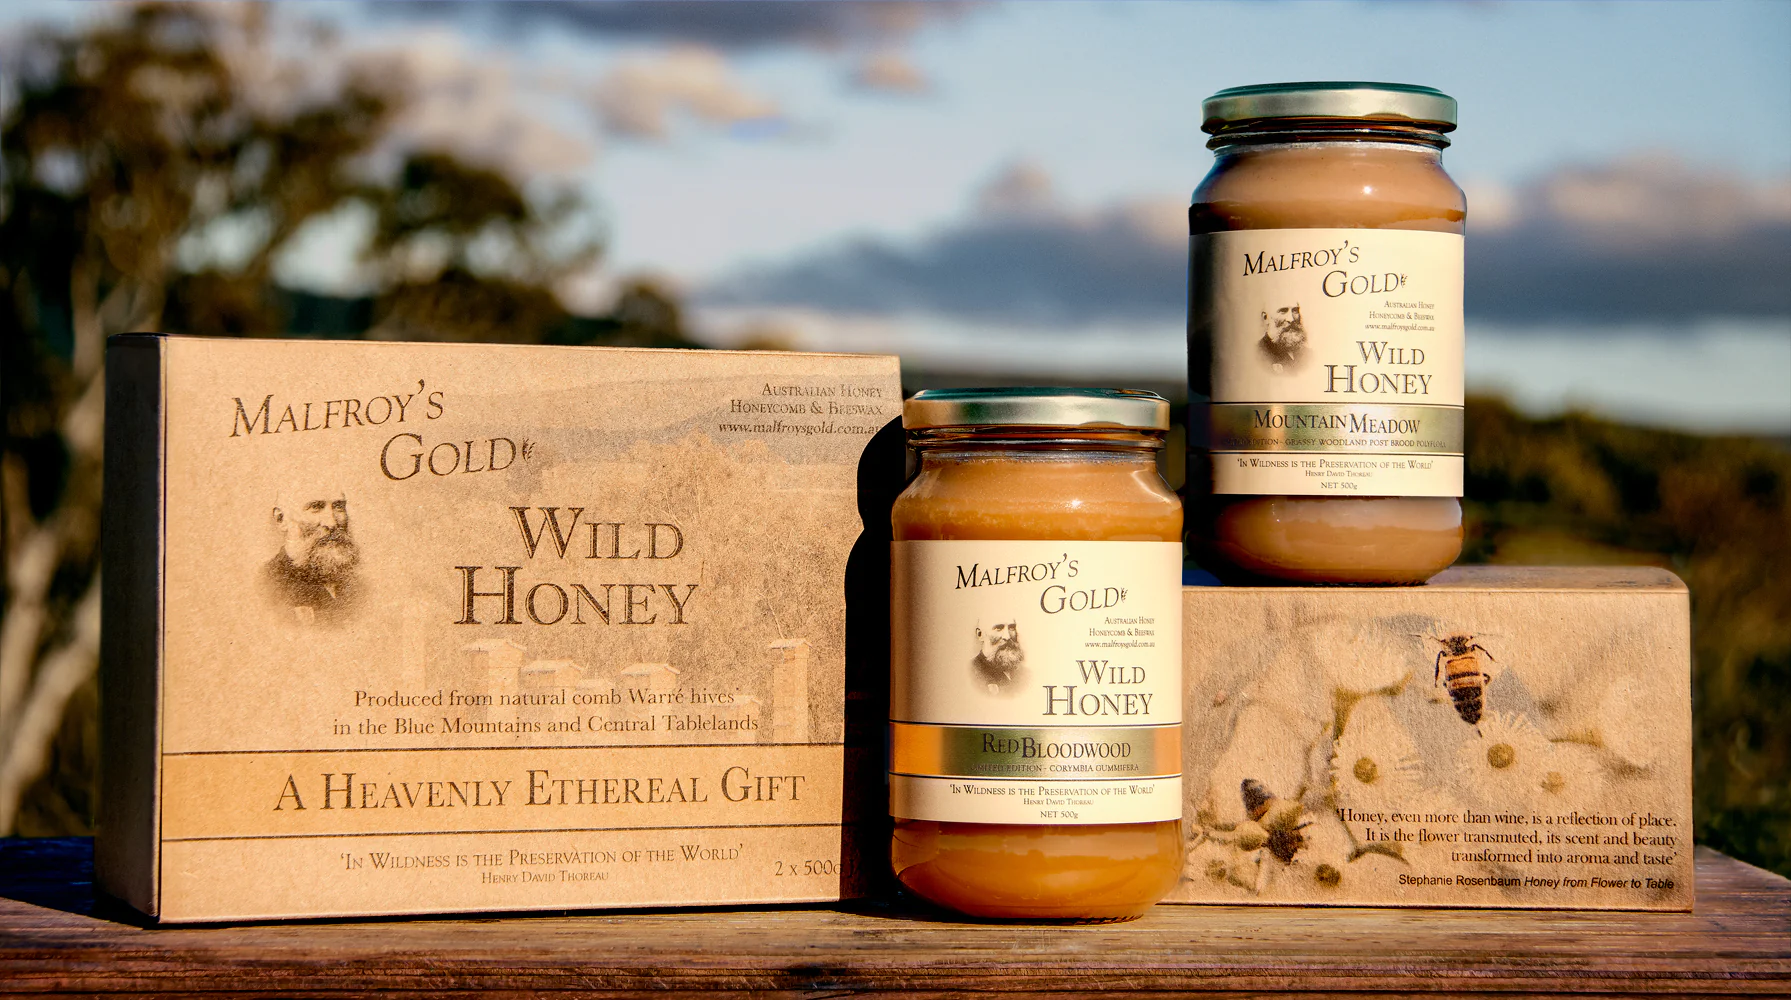 Malfroy's Gold Wild Honey 2 x 500g Gift Pack Limited Edition